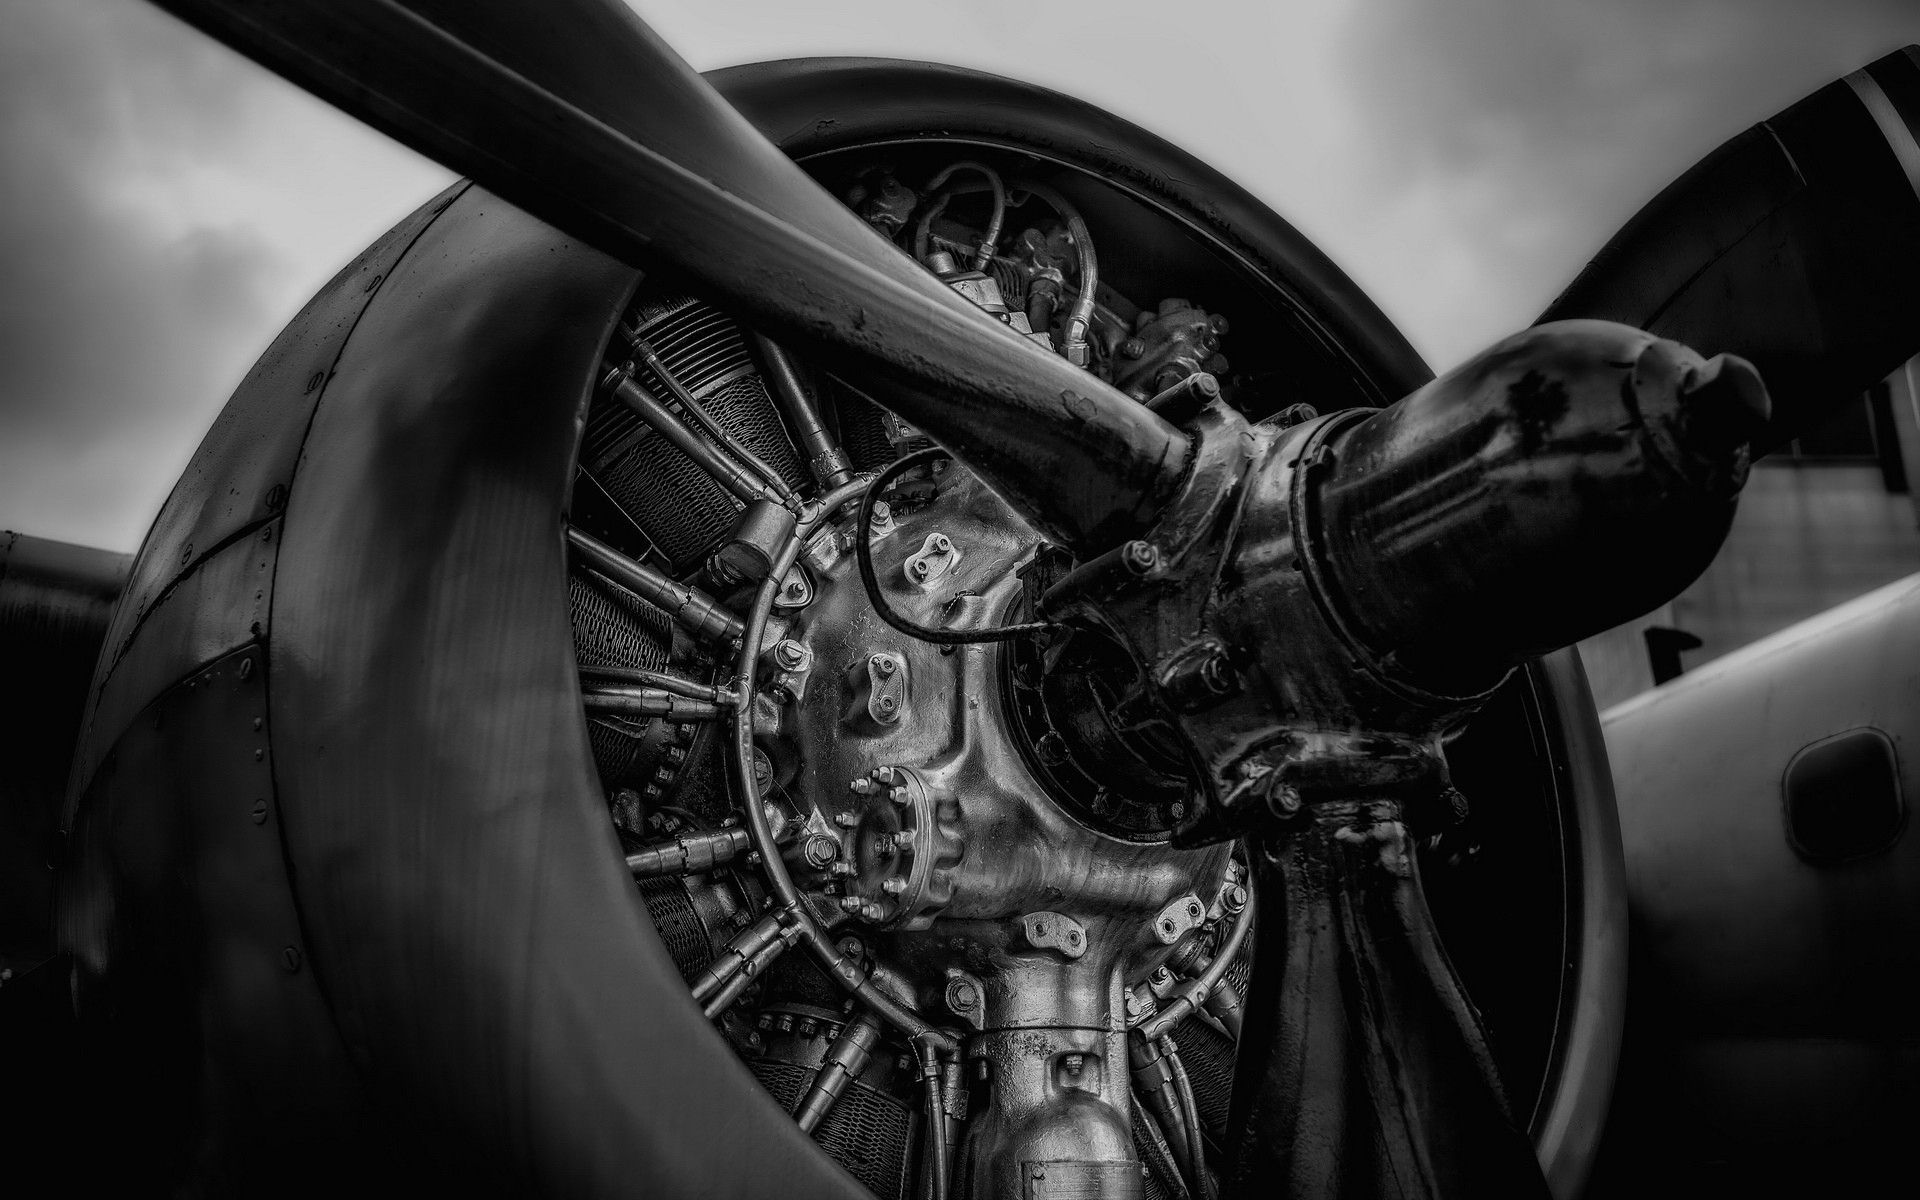 Download Wallpaper, Download 1920x1200 aircraft grayscale propeller radial engine Wallpaper –Free Wallpaper Down. Airplane art, Airplane wallpaper, Aviation art